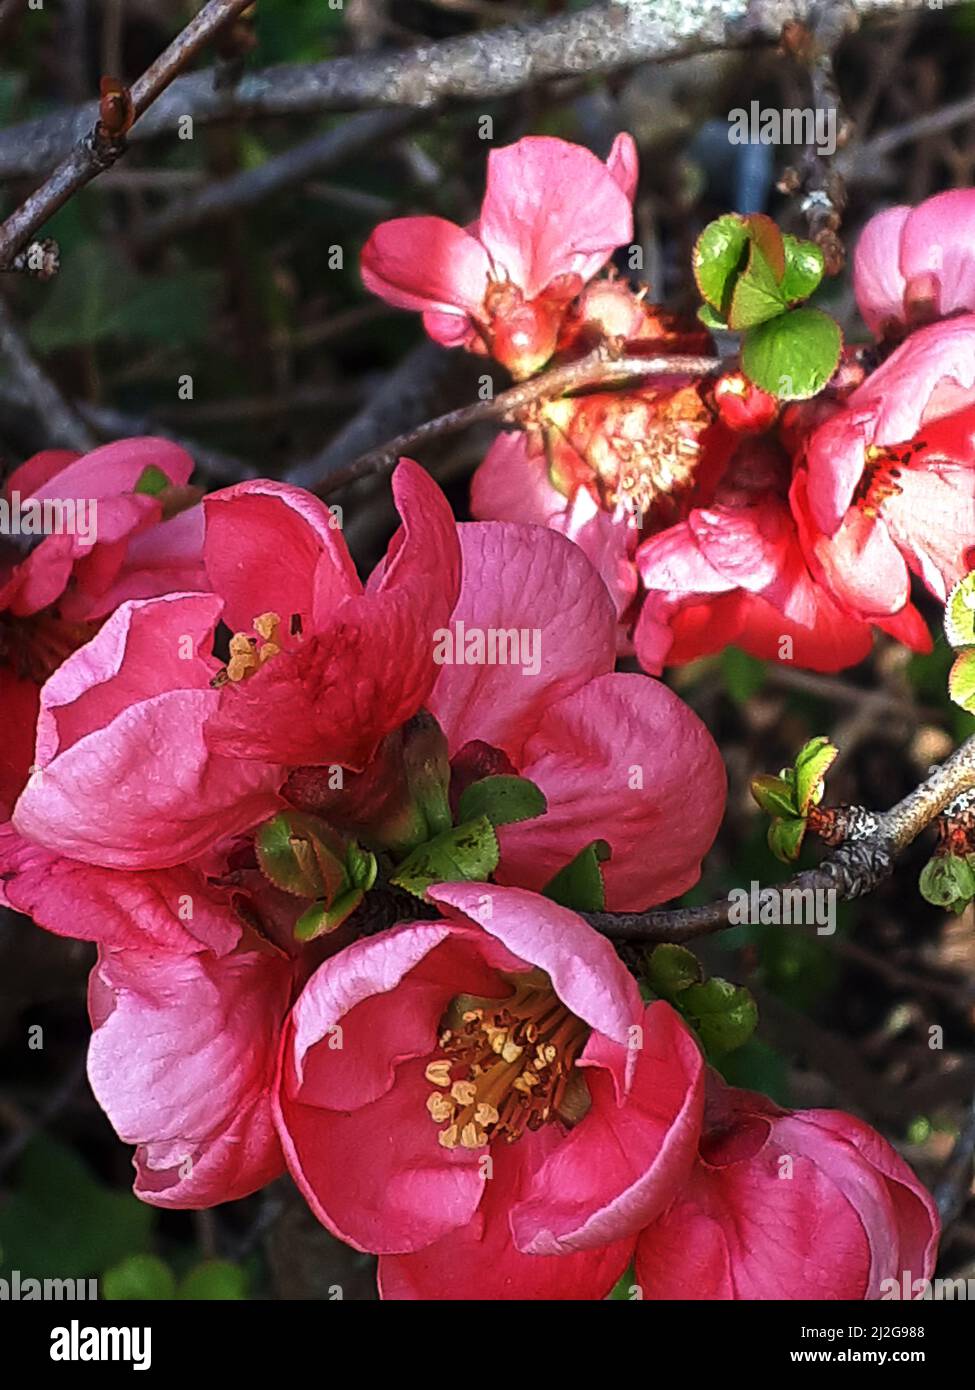 One of the early flowers of Spring in Northern England. This is the blossom of Japanese Chaenomeles Quince whose fruit makes delicious Jam. Stock Photo